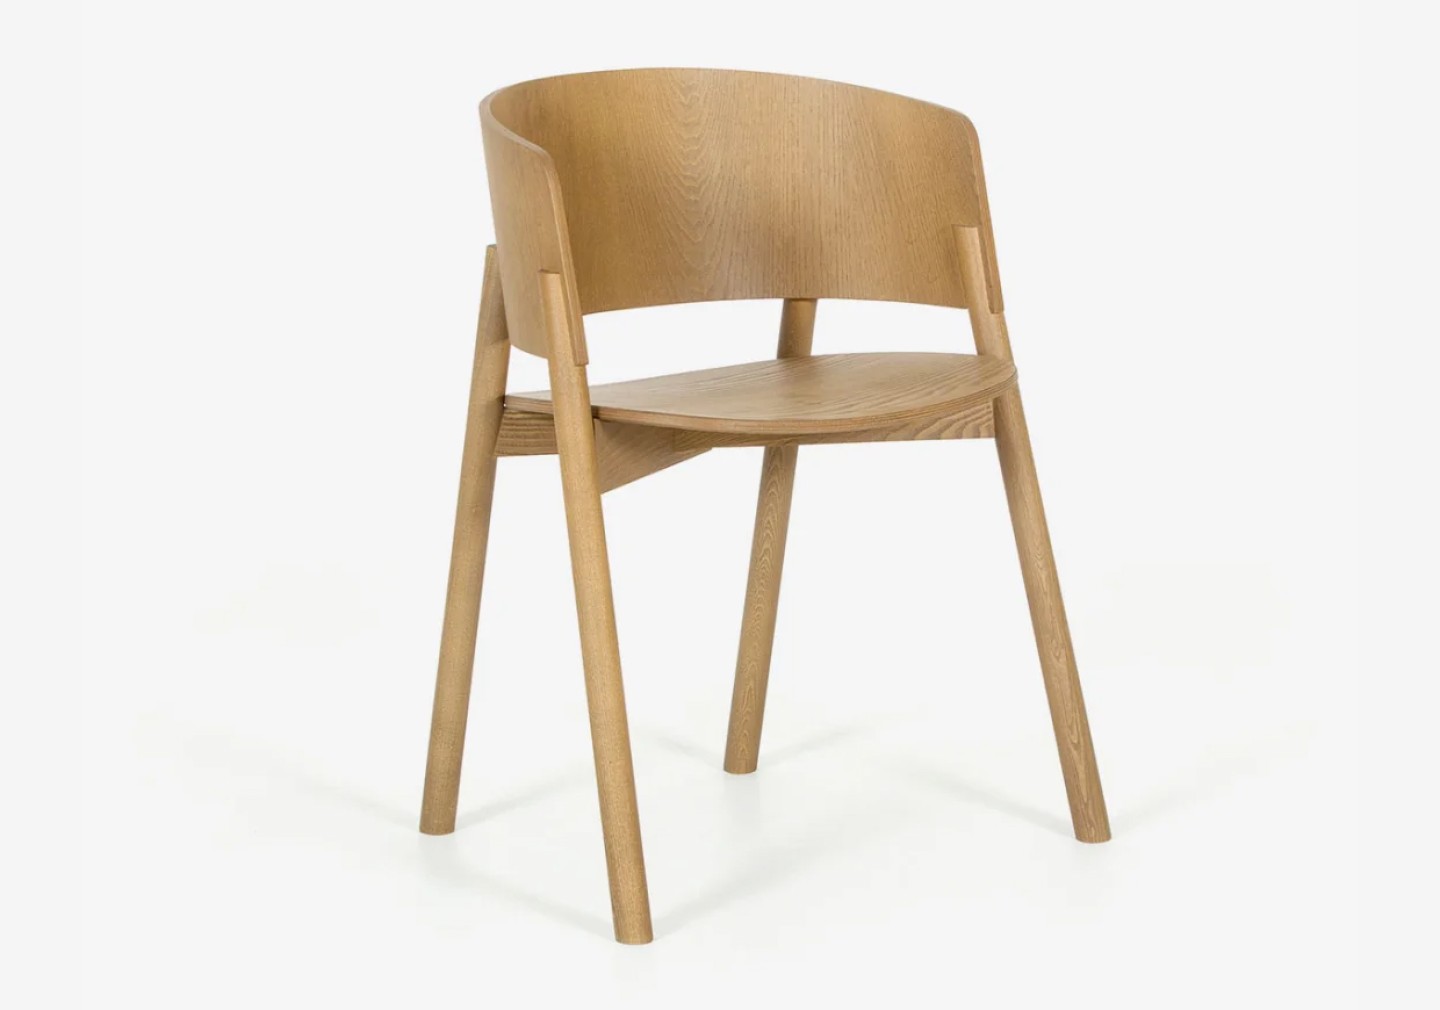 THE HALLA DINING CHAIR by Lorenz+Kaz